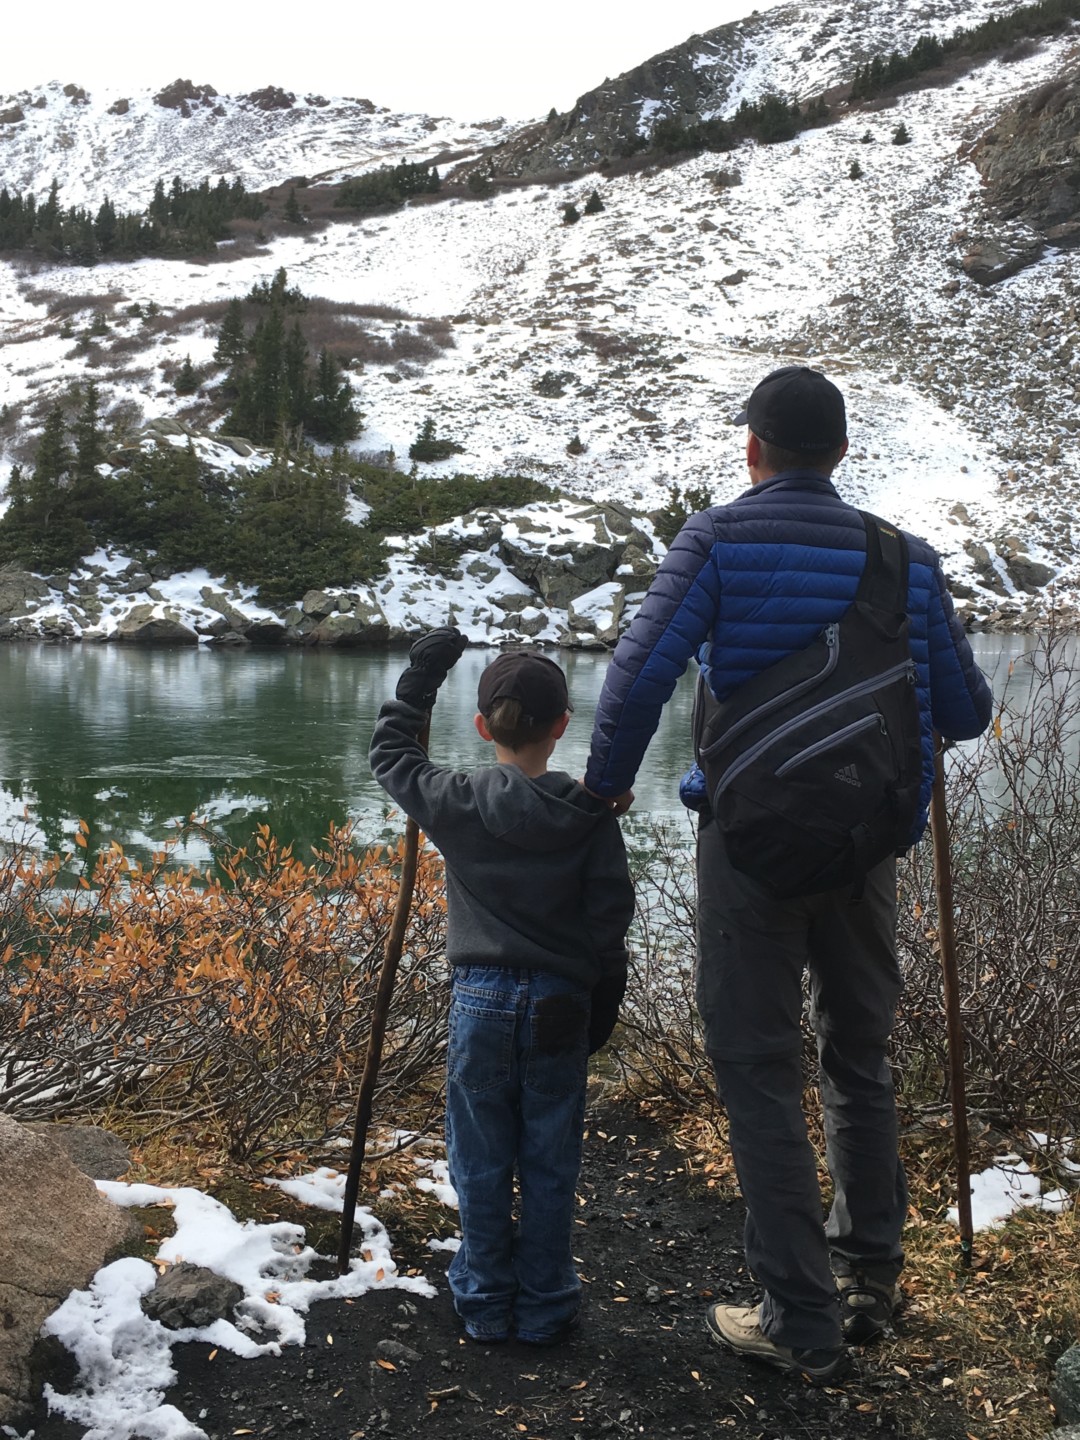 A father and son take in the views near Spring Canyon during Climb Together